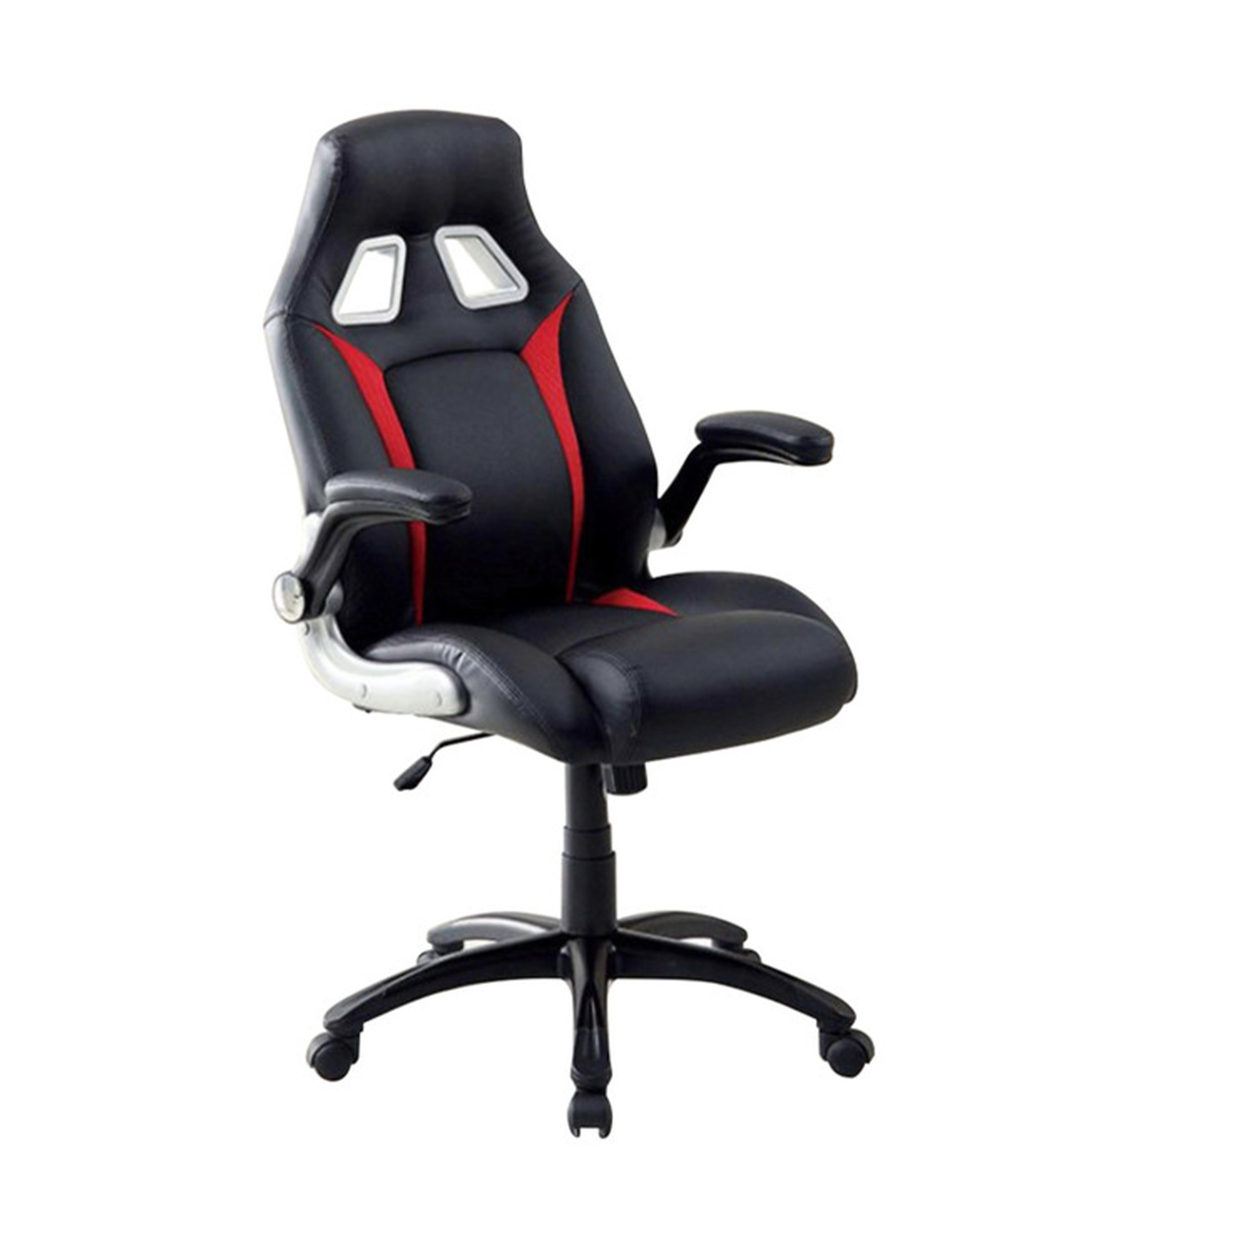 Leatherette Gaming Chair With Padded Armrests And Adjustable Height, Black- Saltoro Sherpi